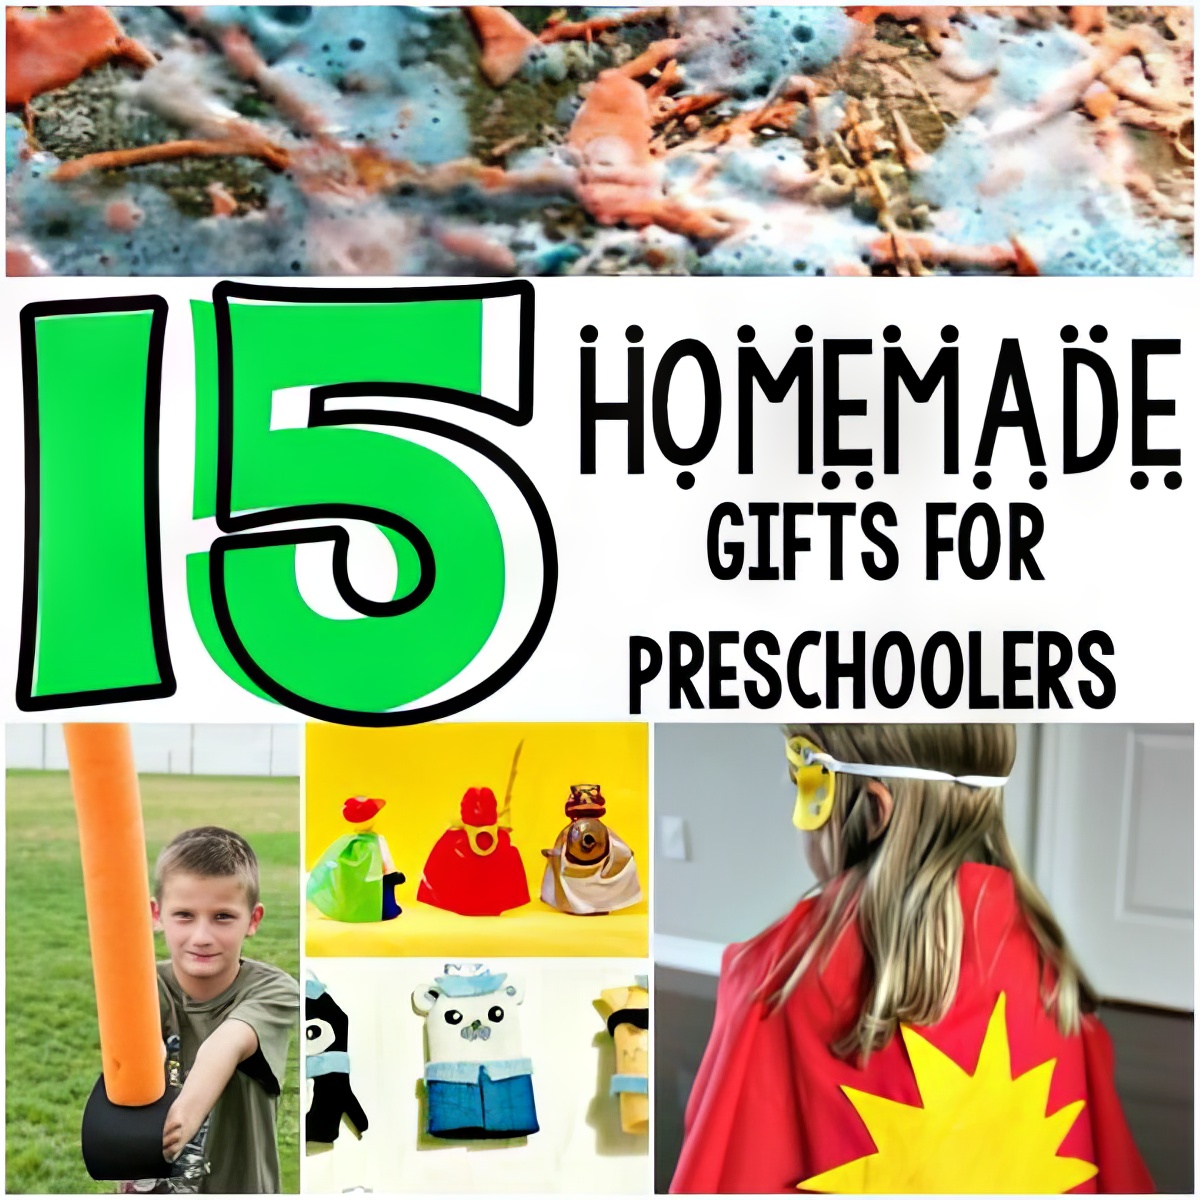 gift ideas for preschoolers collage of homemade gifts for toddlers and preschoolers